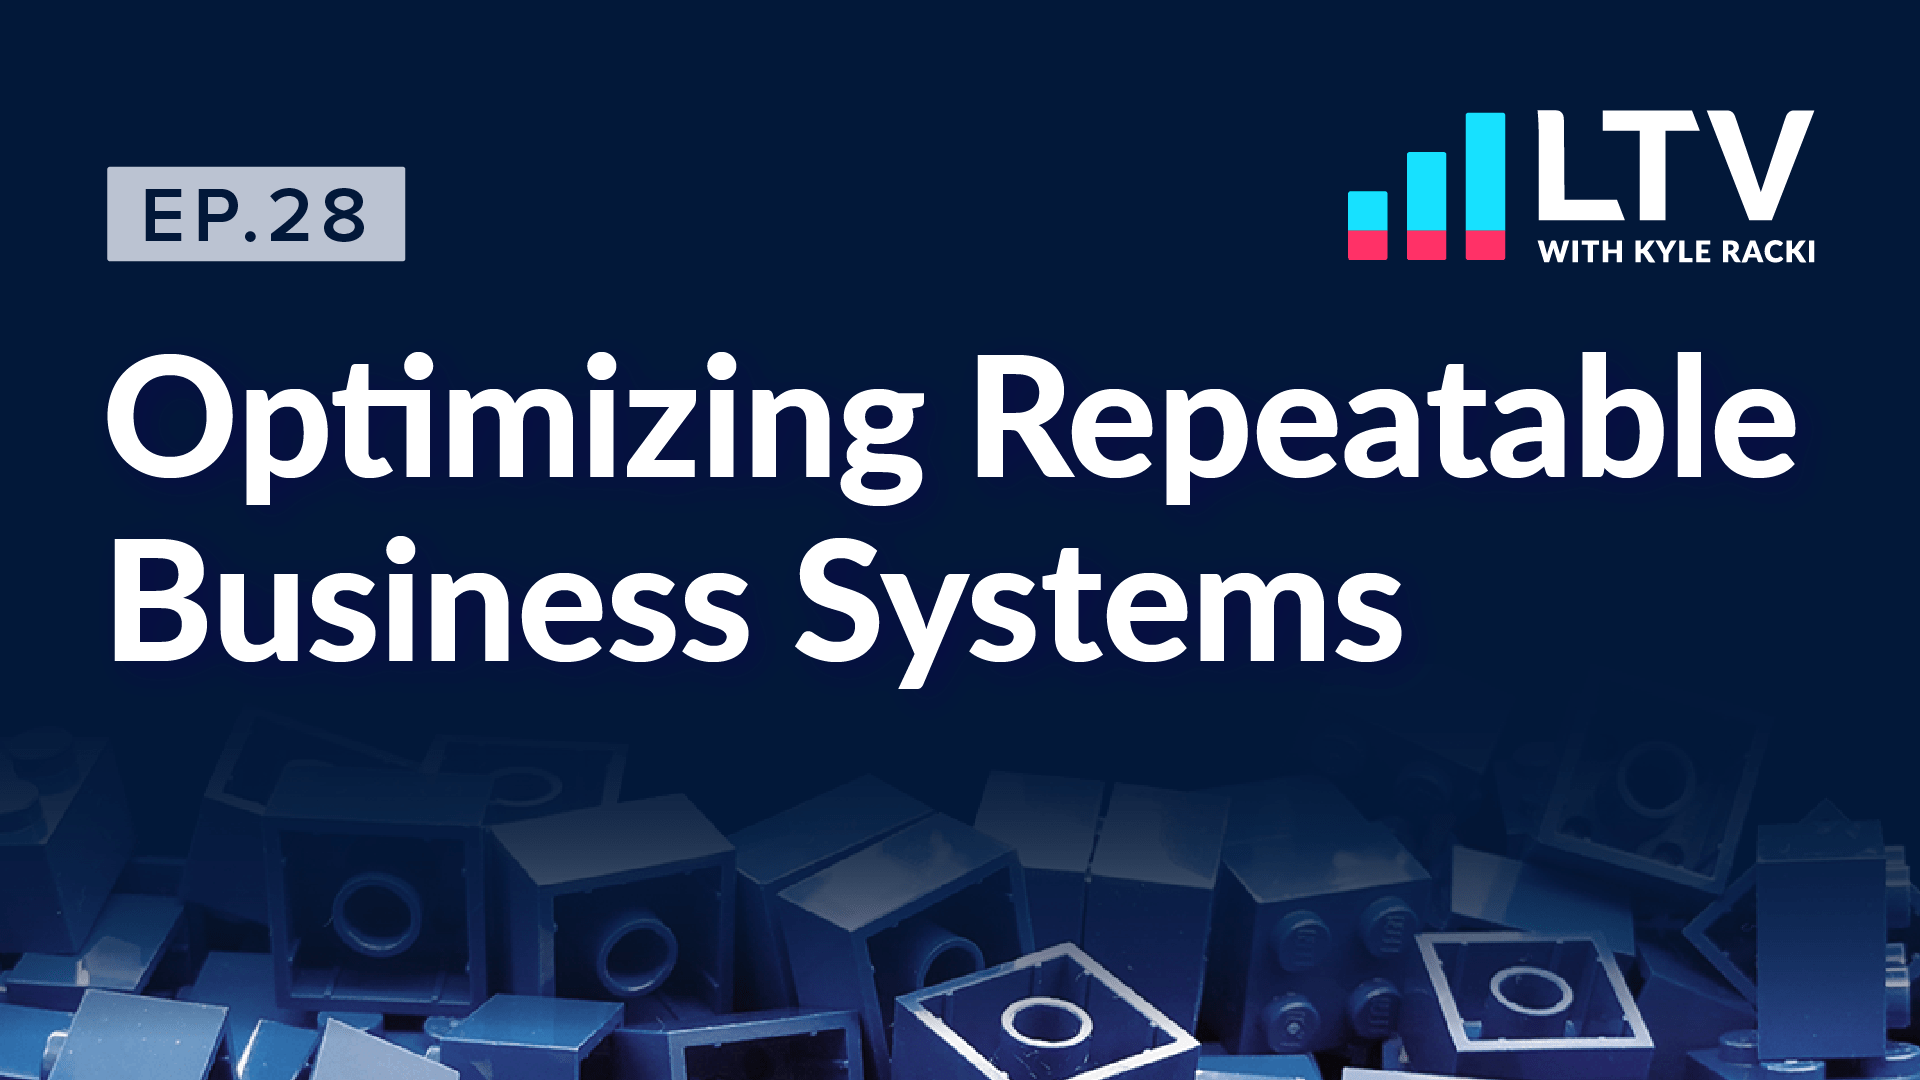 LTV Podcast Ep. 28: optimizing Repeatable Business Systems